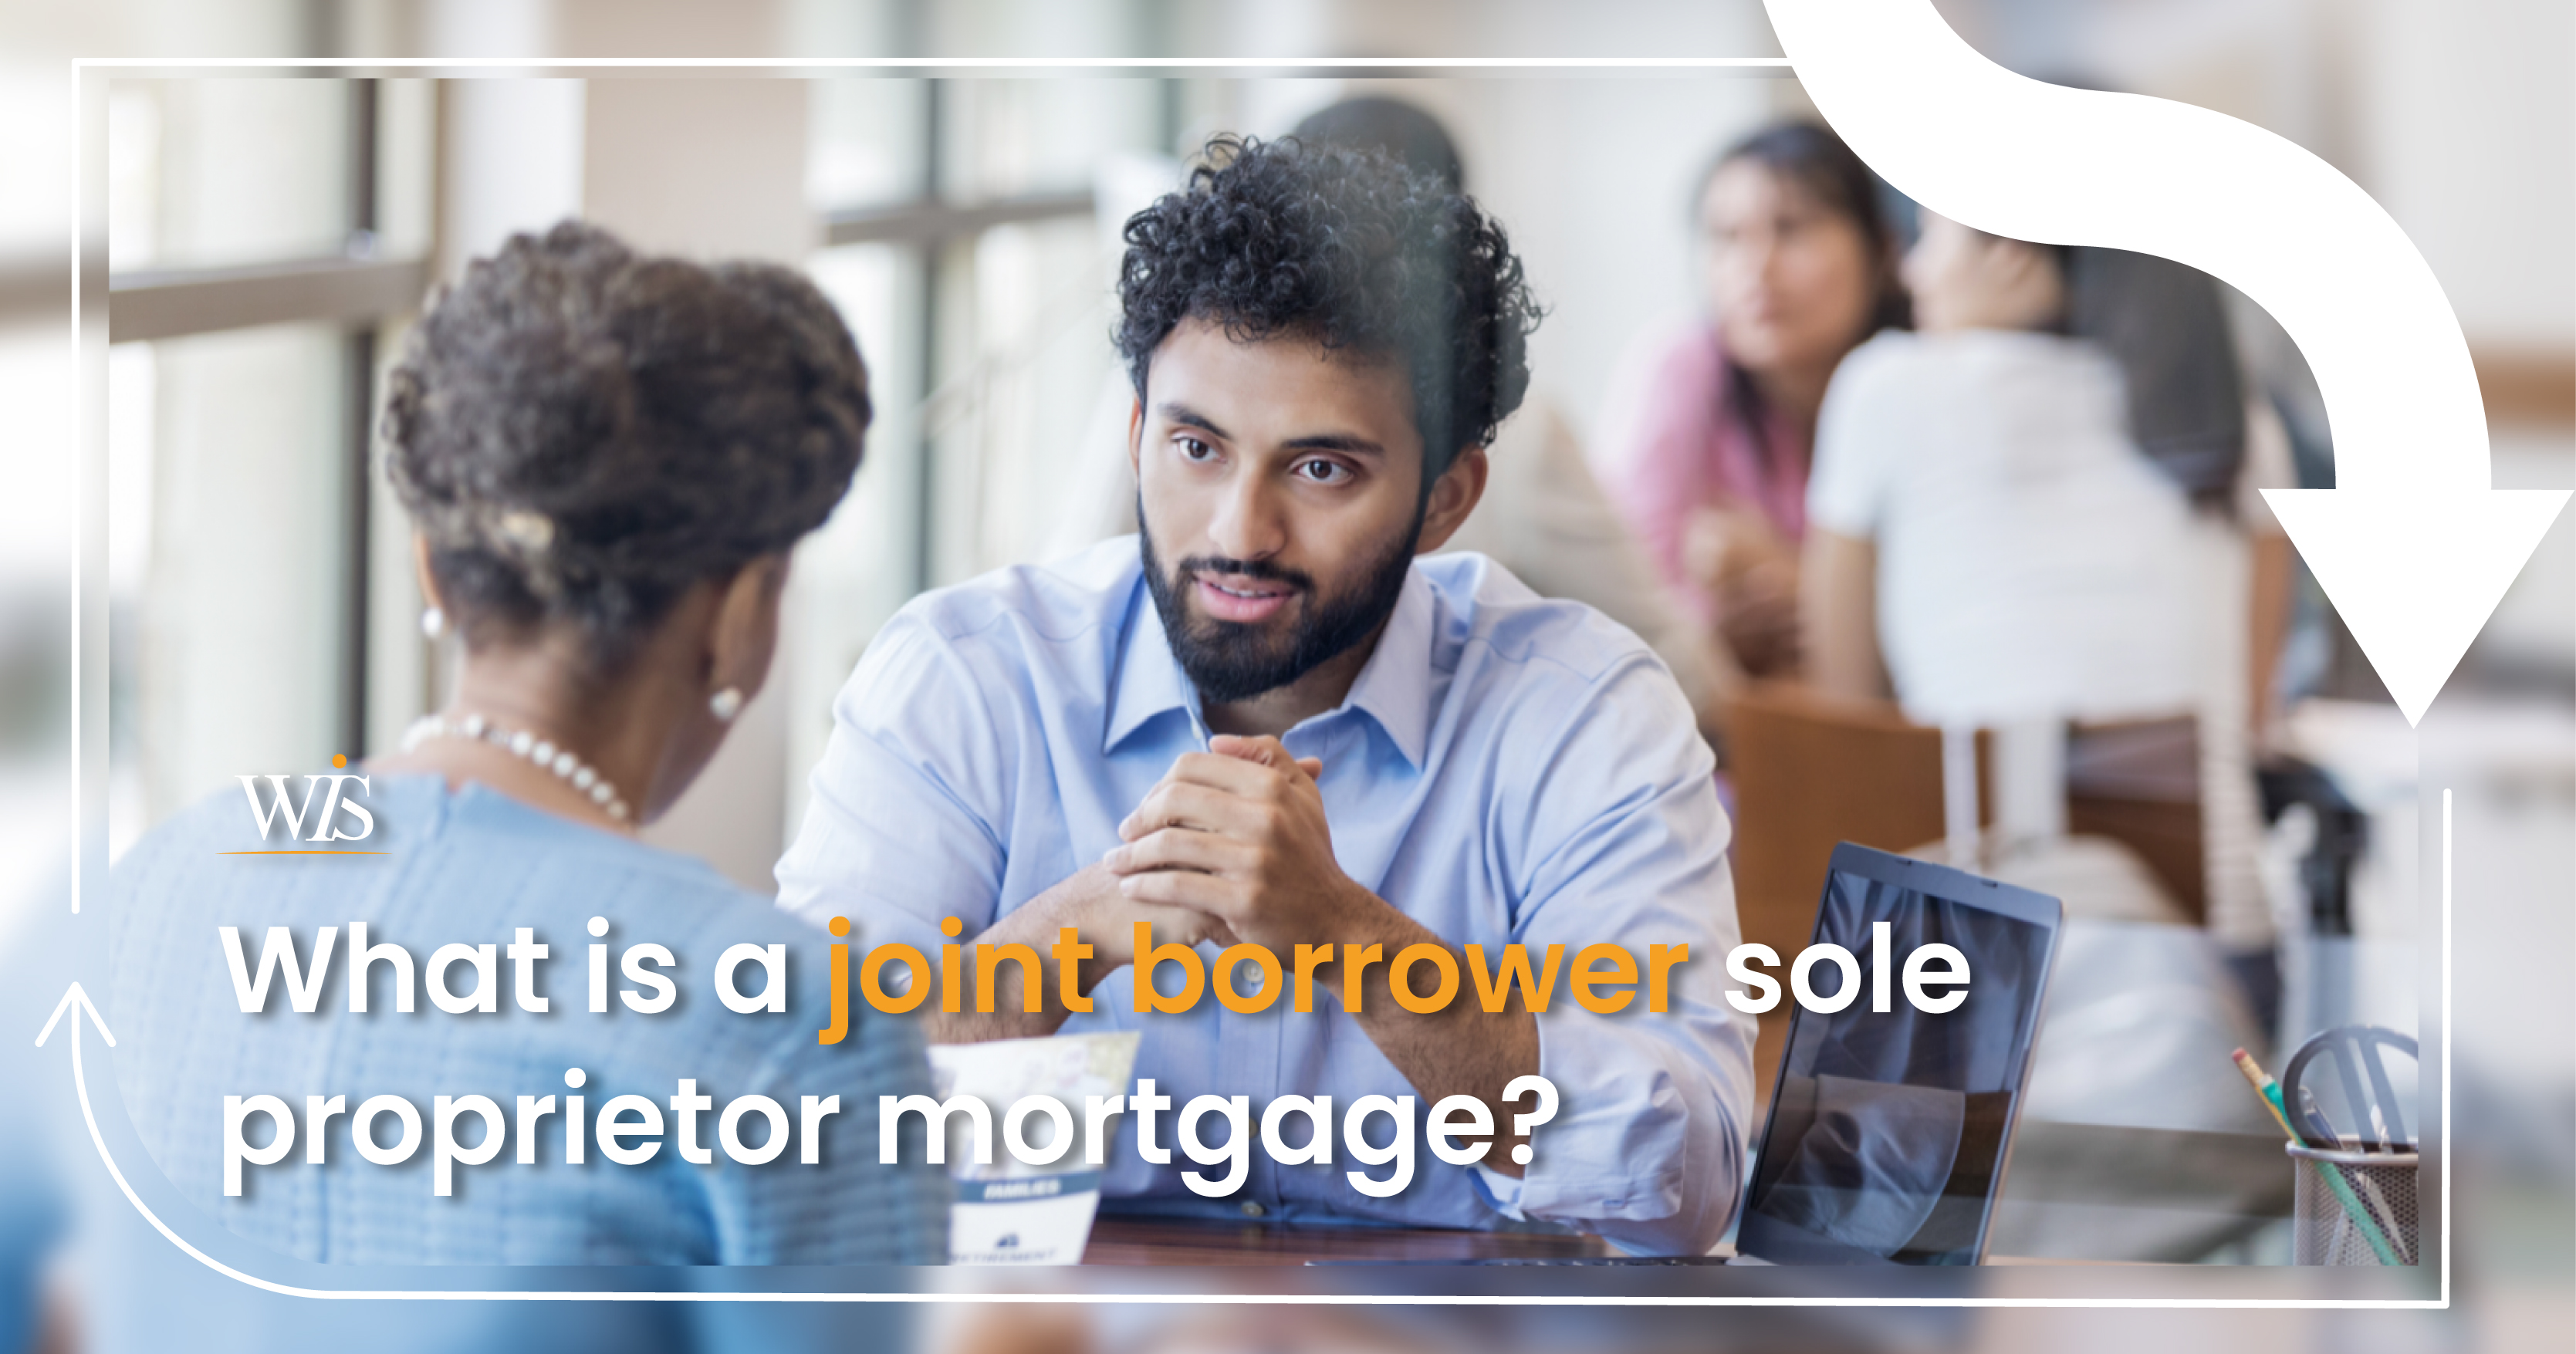 What is a joint borrower sole proprietor mortgage? image